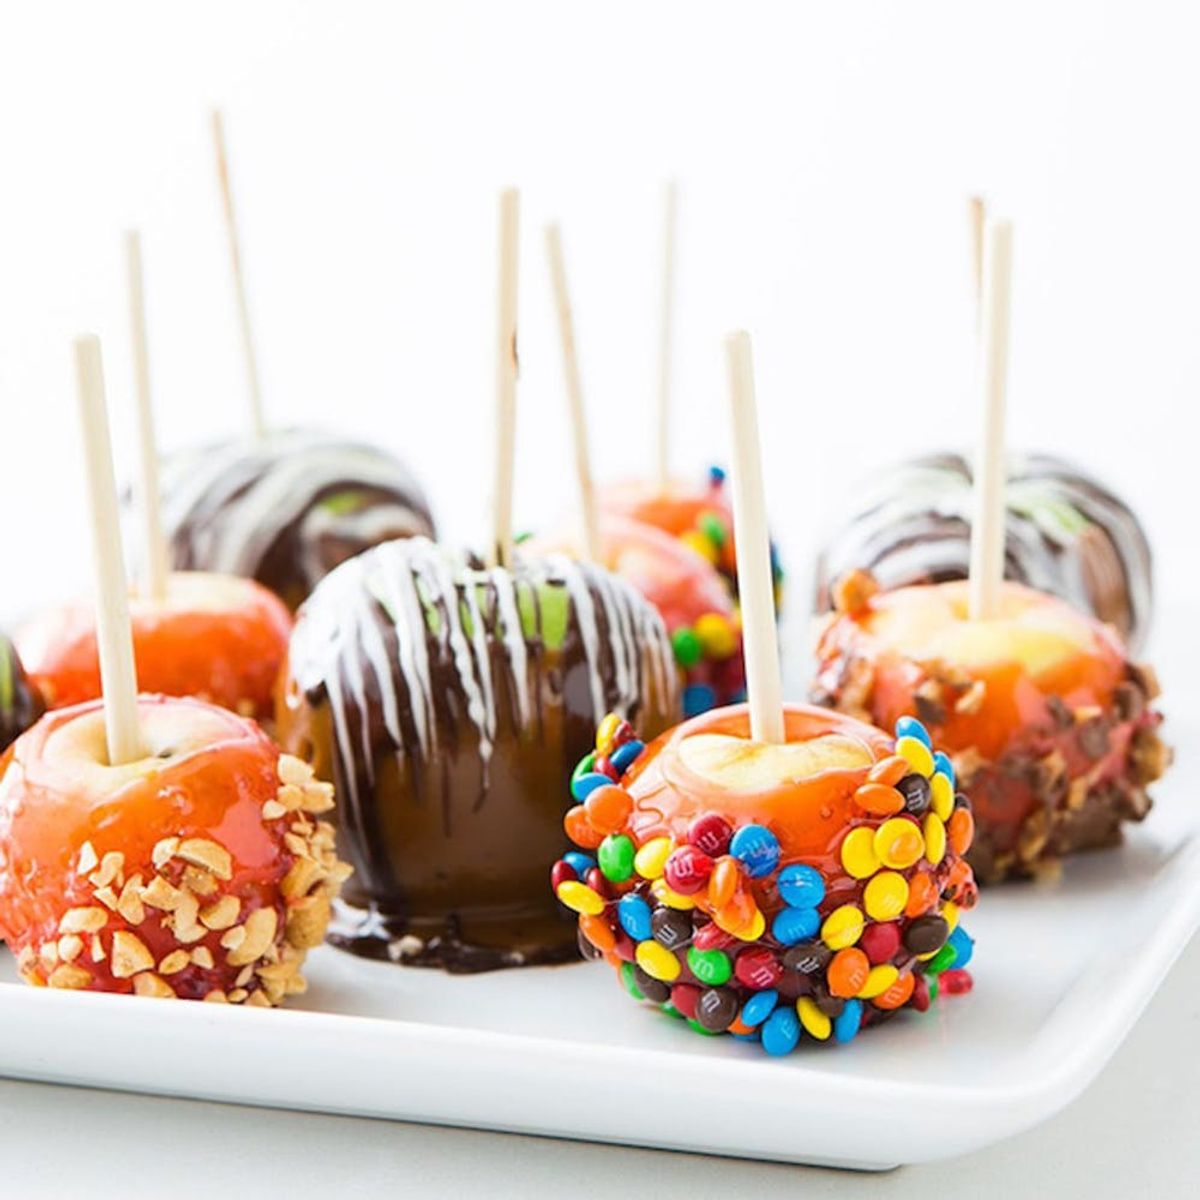 16 Halloween Desserts That Will Satisfy Any Diet